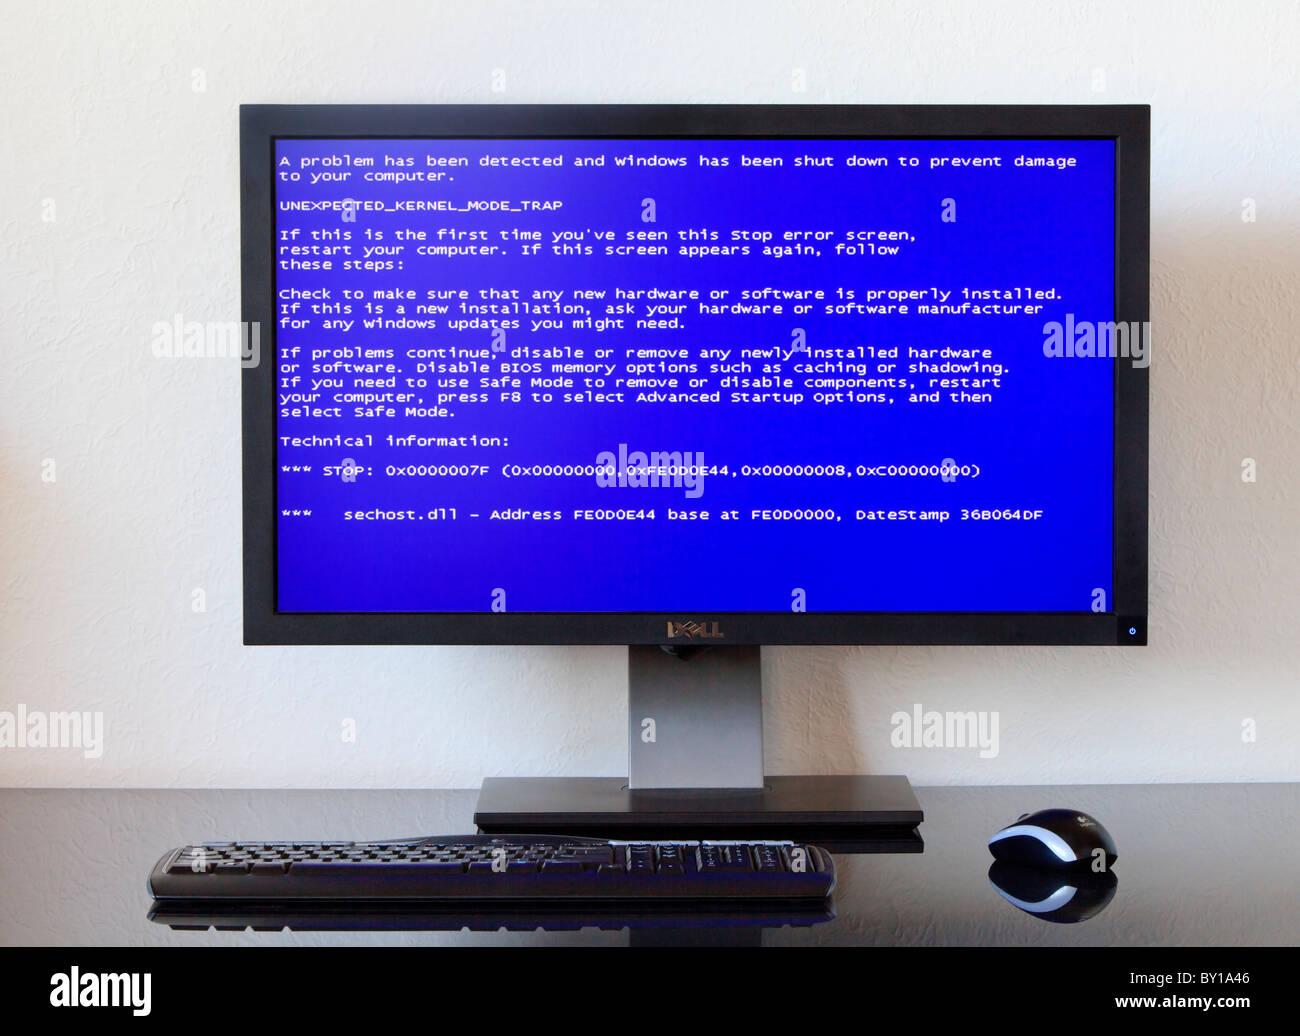 Windows PC showing an error message, commonly known as the 'Blue Screen of Death'. Stock Photo